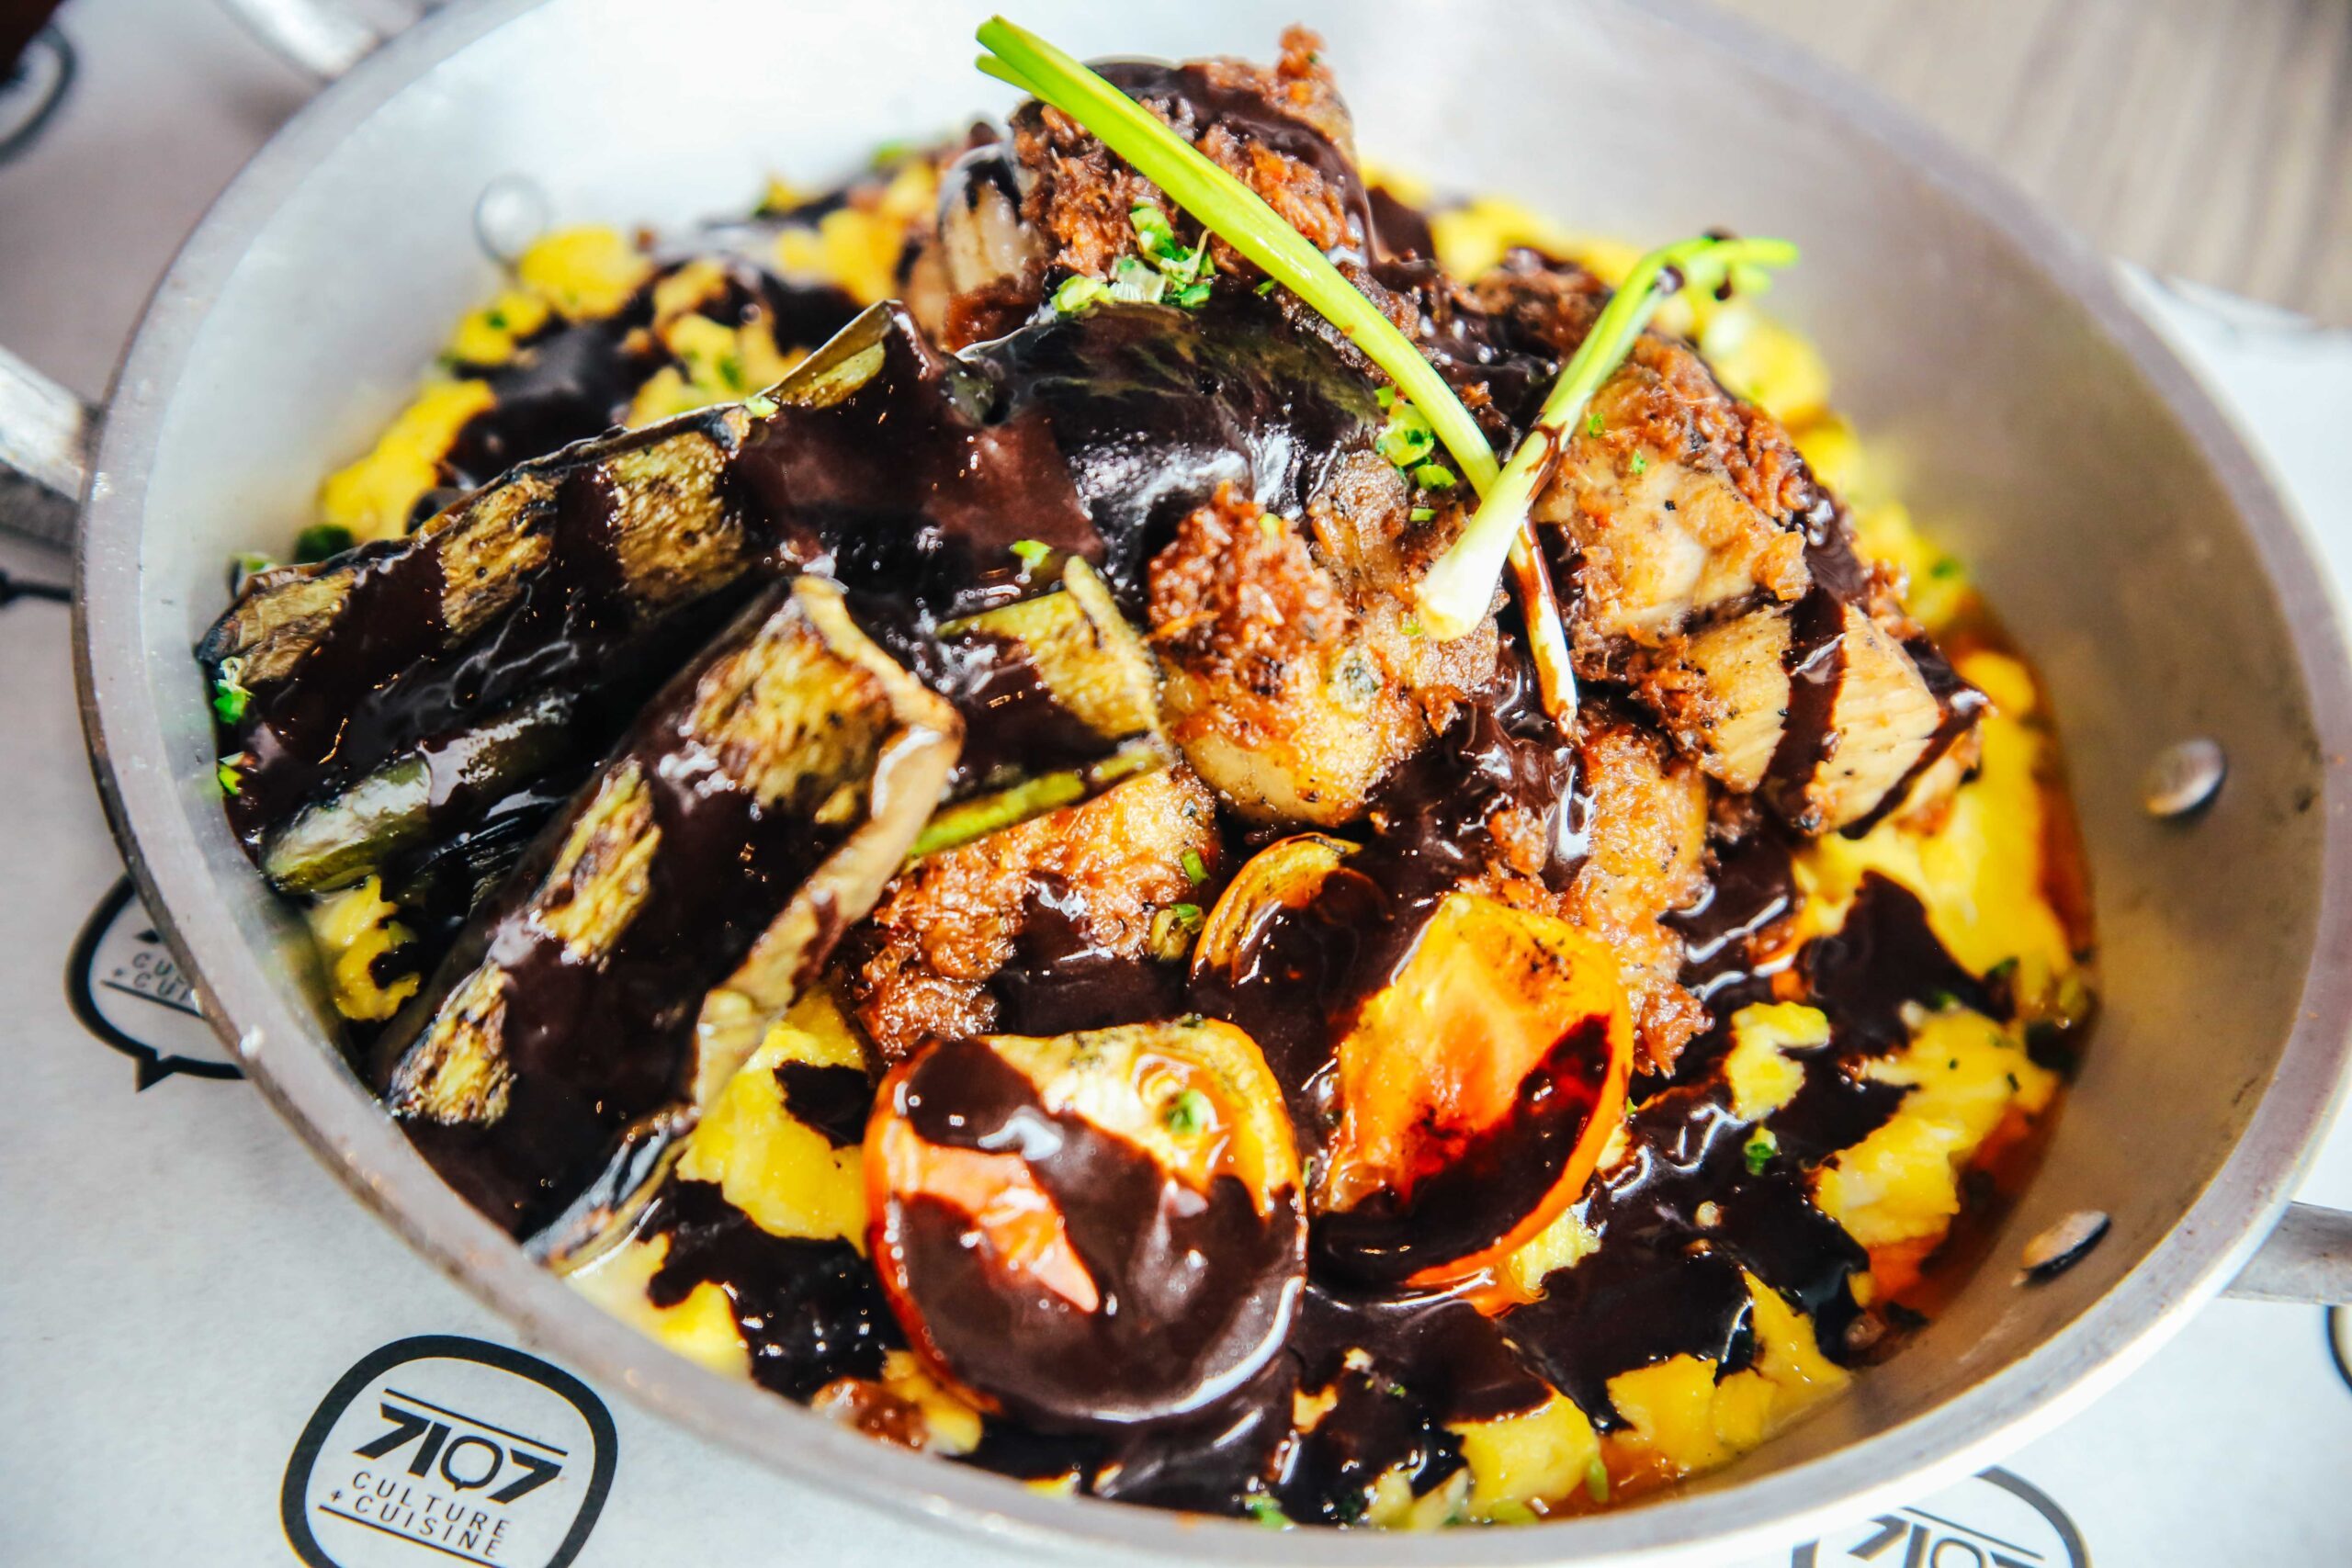 7107: This BGC restaurant adds delicious twists to classic Pinoy dishes